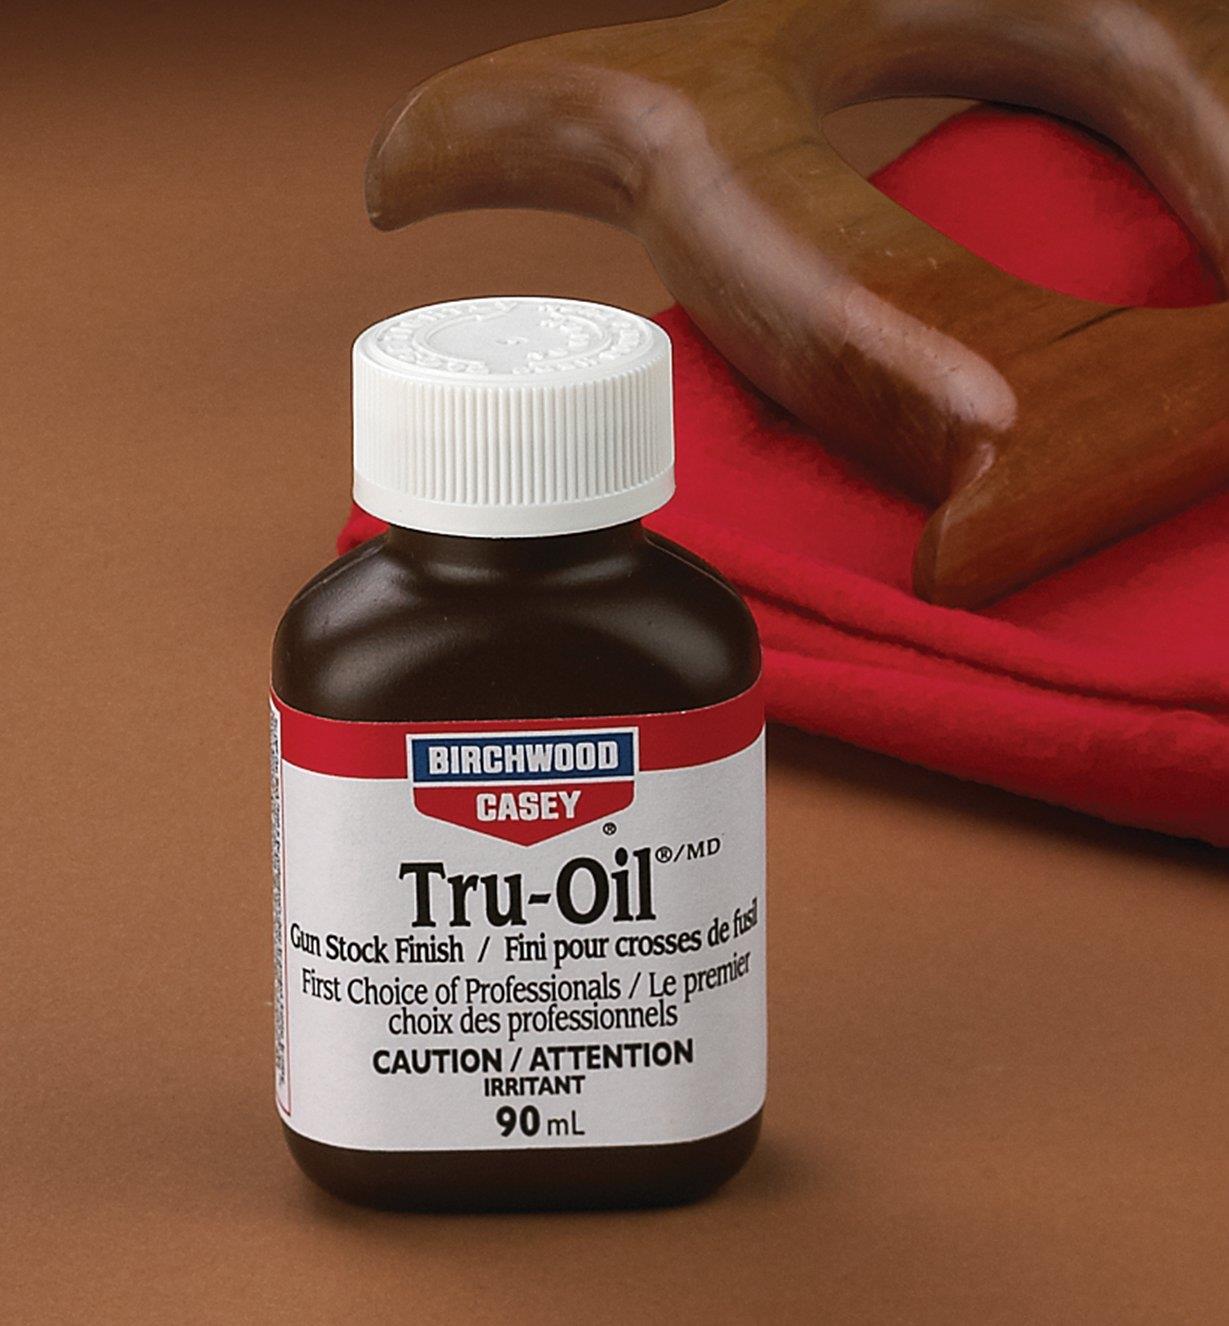 Bottle of Tru-Oil next to a saw handle